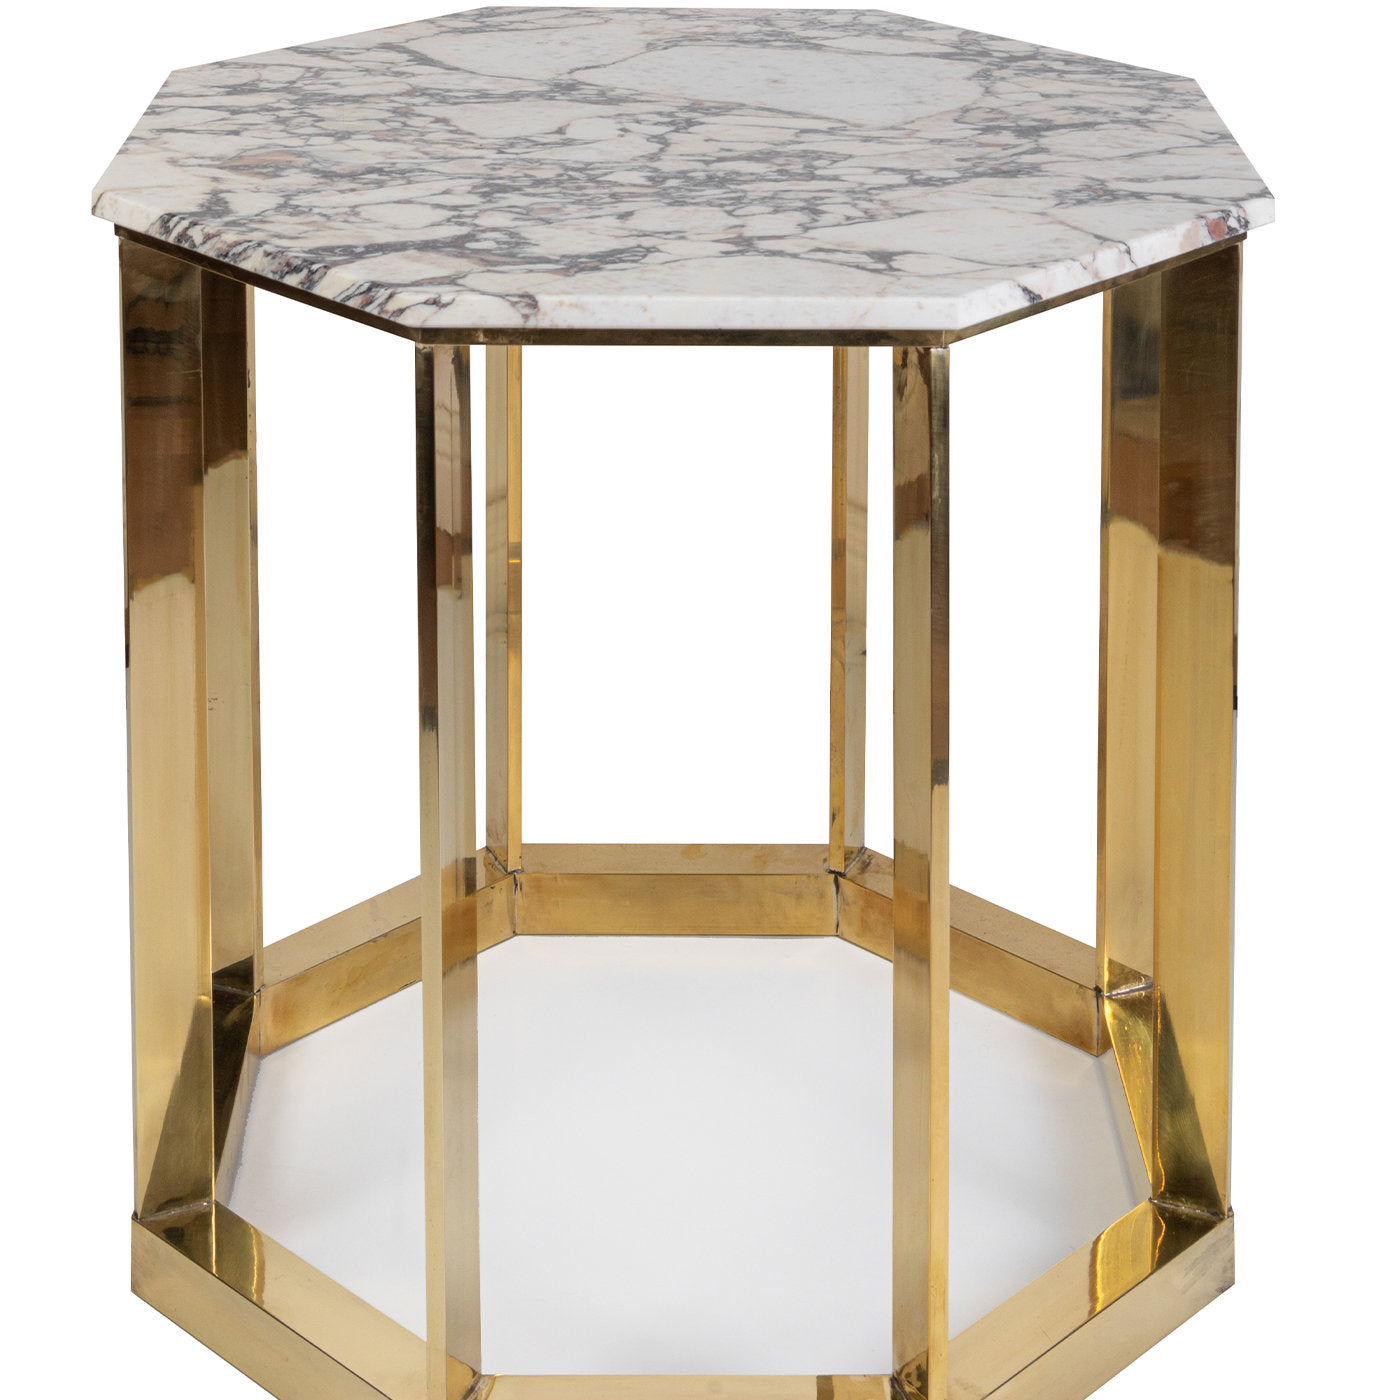 Art of Stone Side Table - Alternative view 5